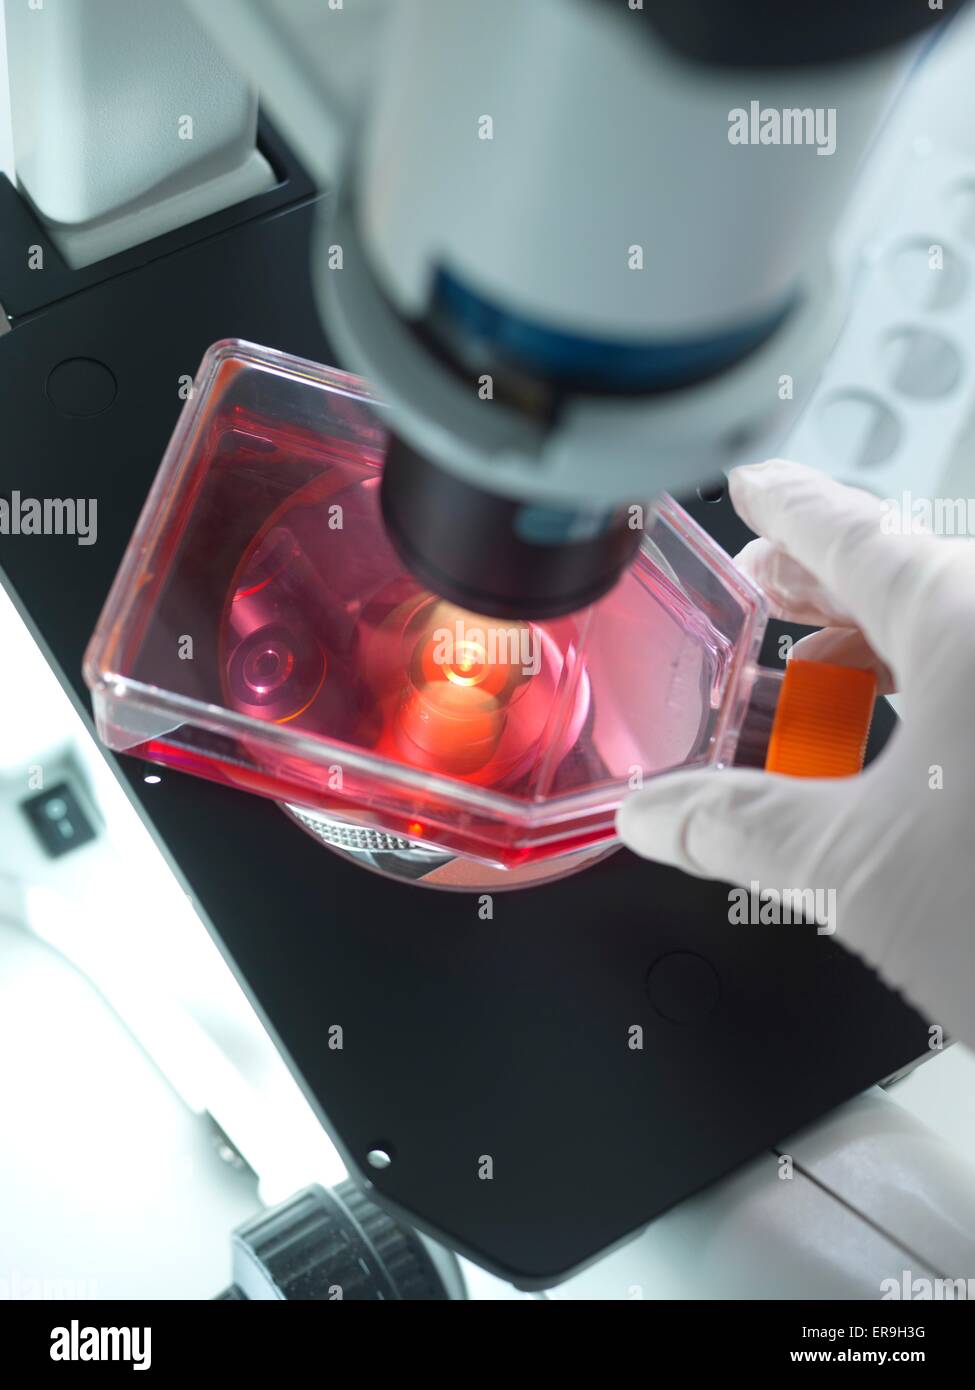 PROPERTY RELEASED. MODEL RELEASED. Biological research. Laboratory researcher using a light microscope to examine the contents of a culture jar. Stock Photo